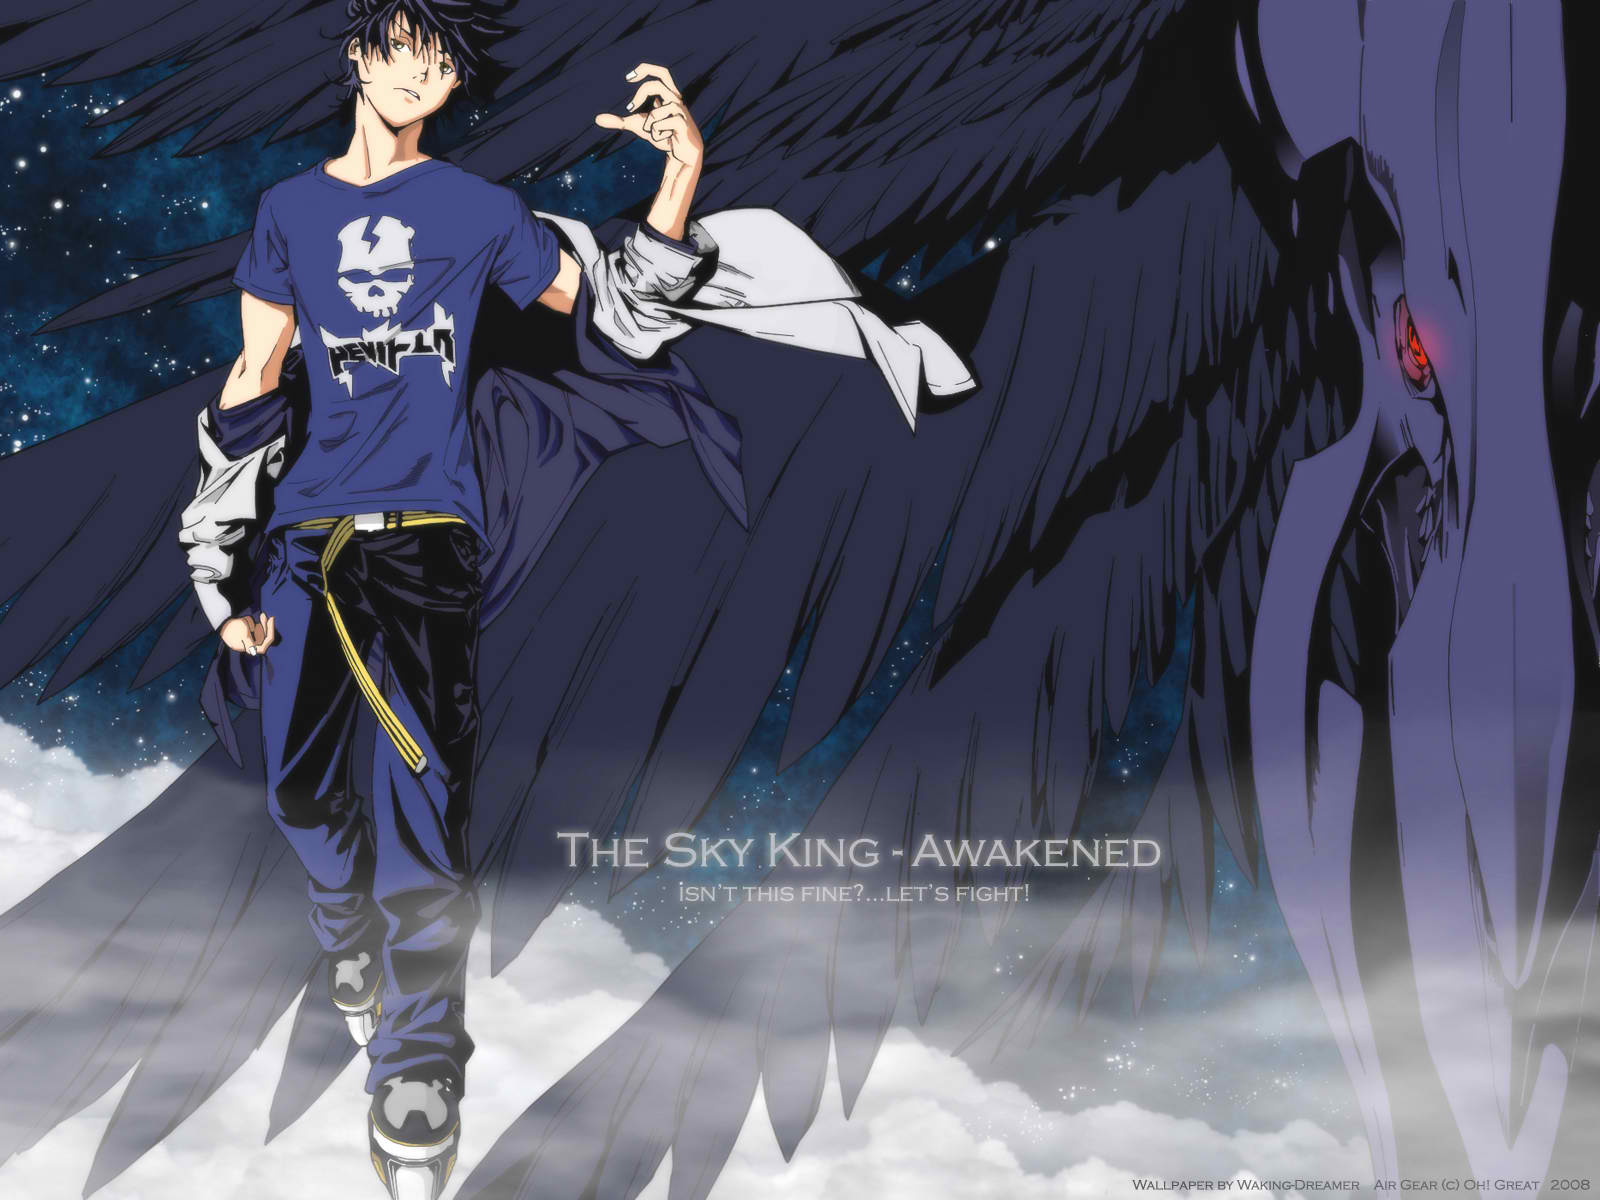 Anime-inspired character, Sky King from Air Gear, graces this captivating desktop wallpaper.